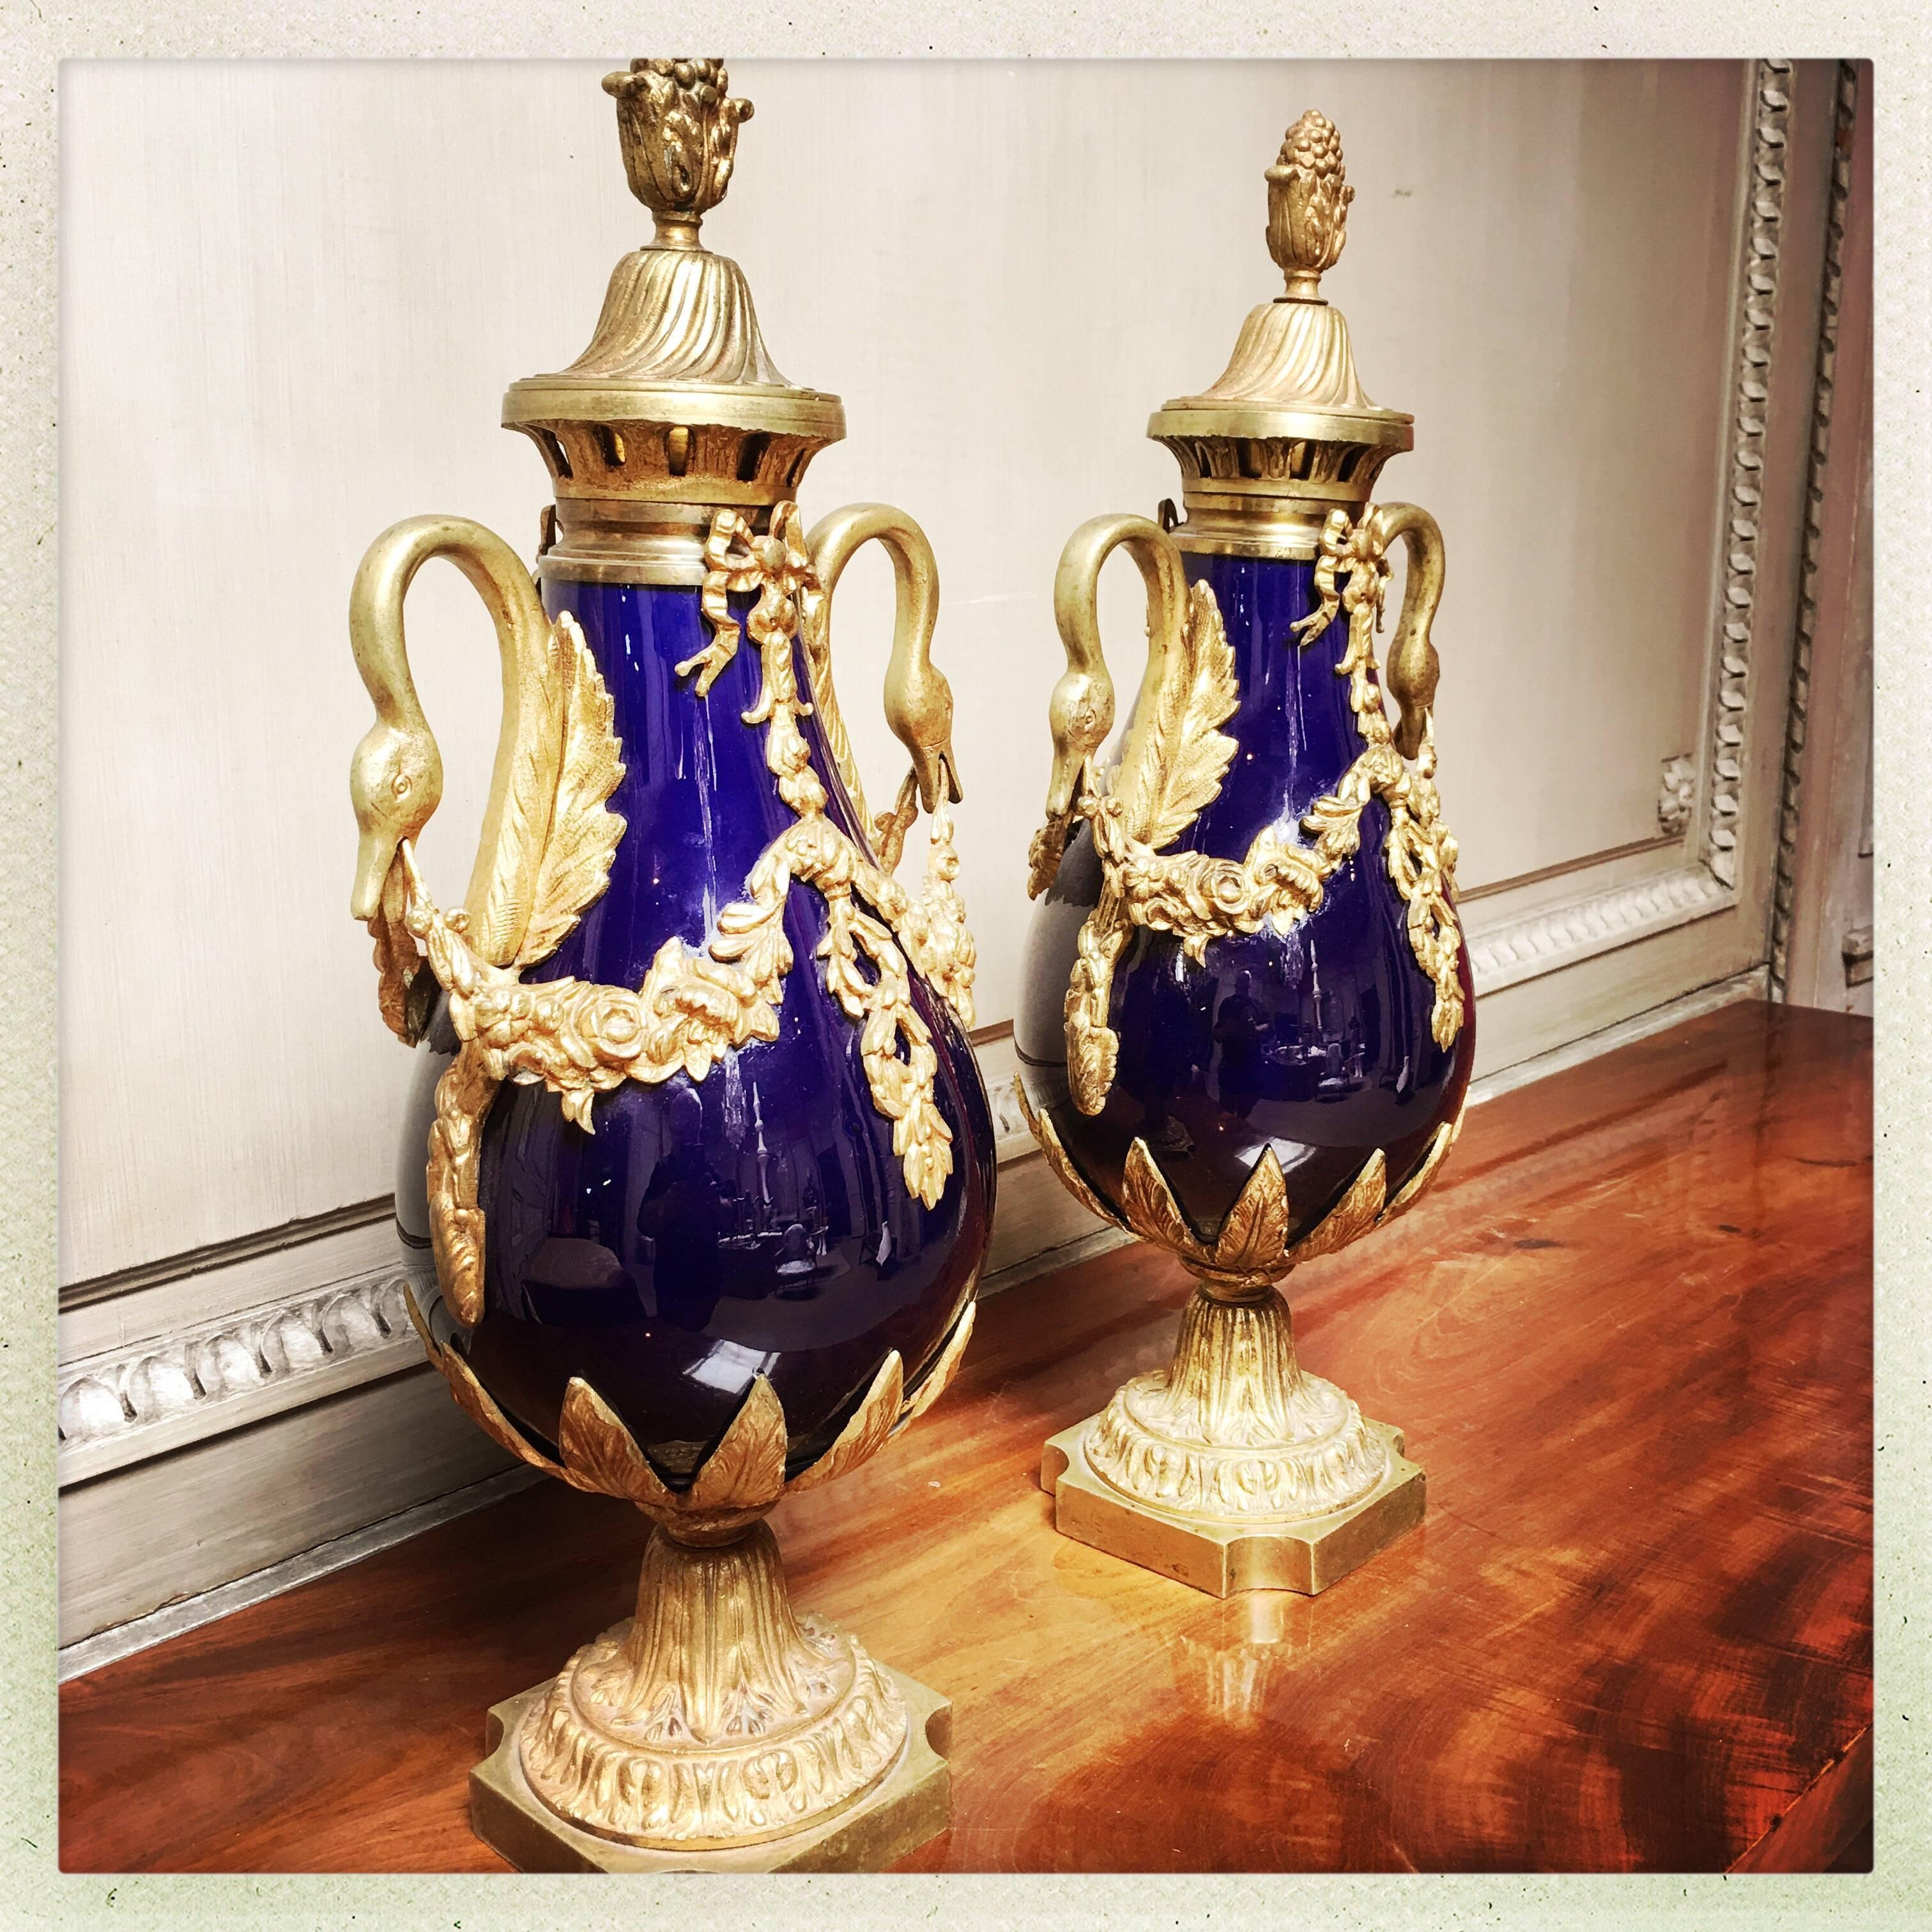 A pair of French cobalt blue porcelain and bronze mounted cassolettes in the Louis XVI style from the late 19th century.